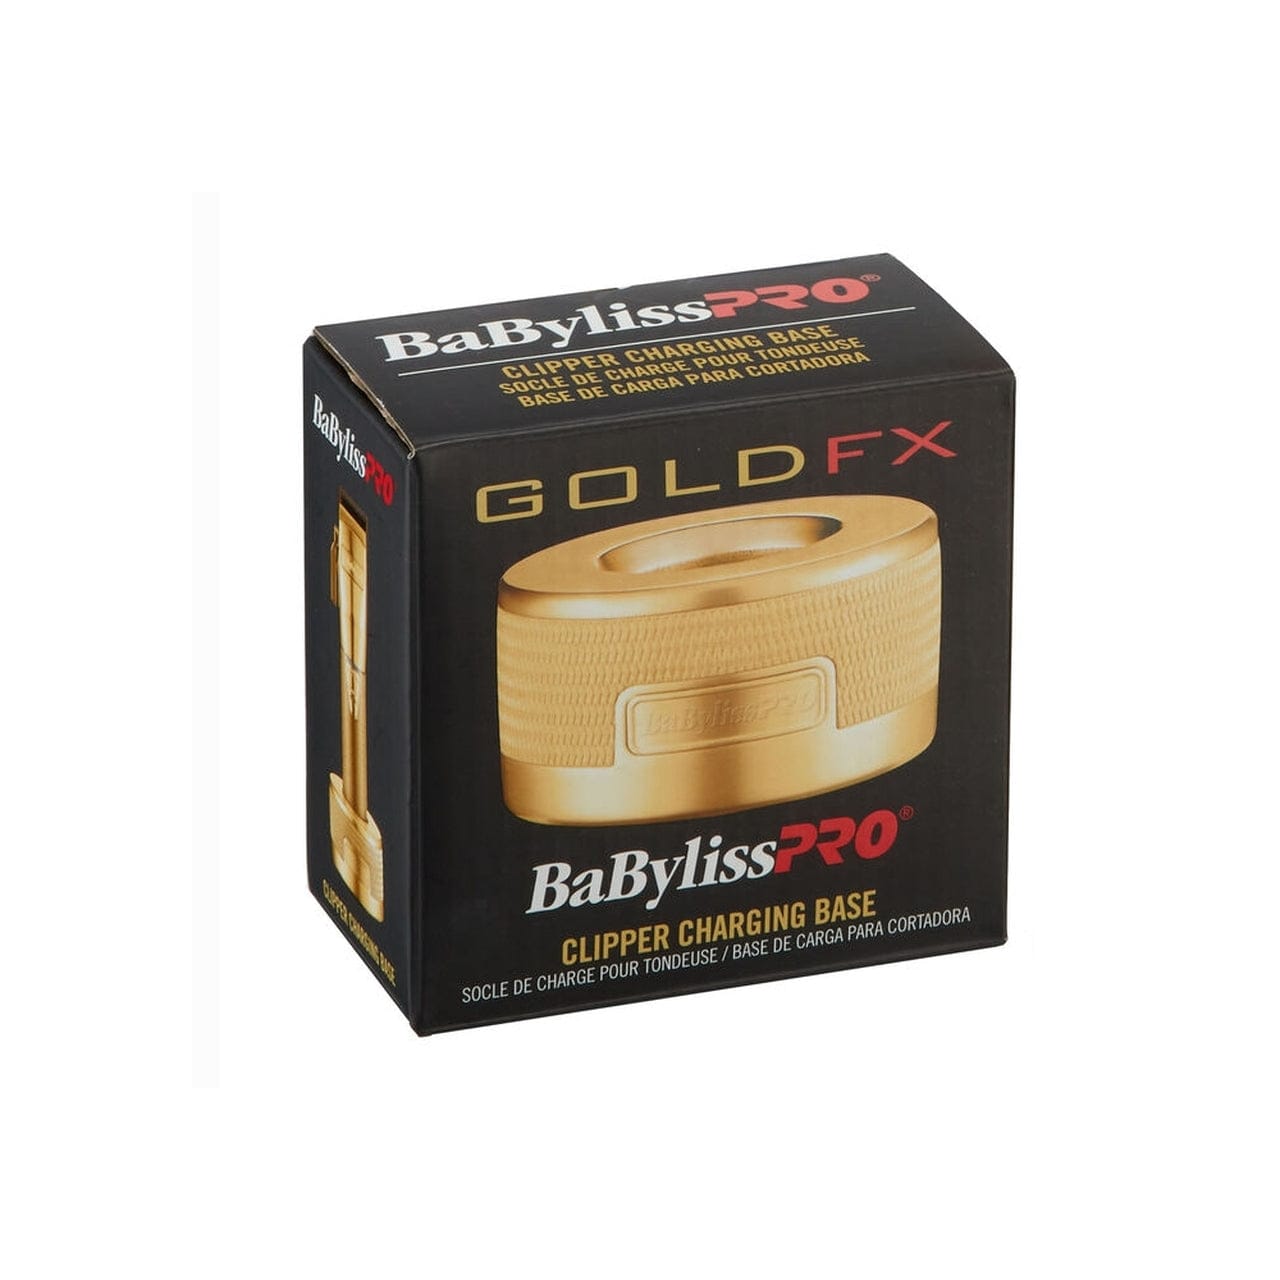 A sleek Babyliss Gold FX trimmer charging base, perfect for grooming on-the-go